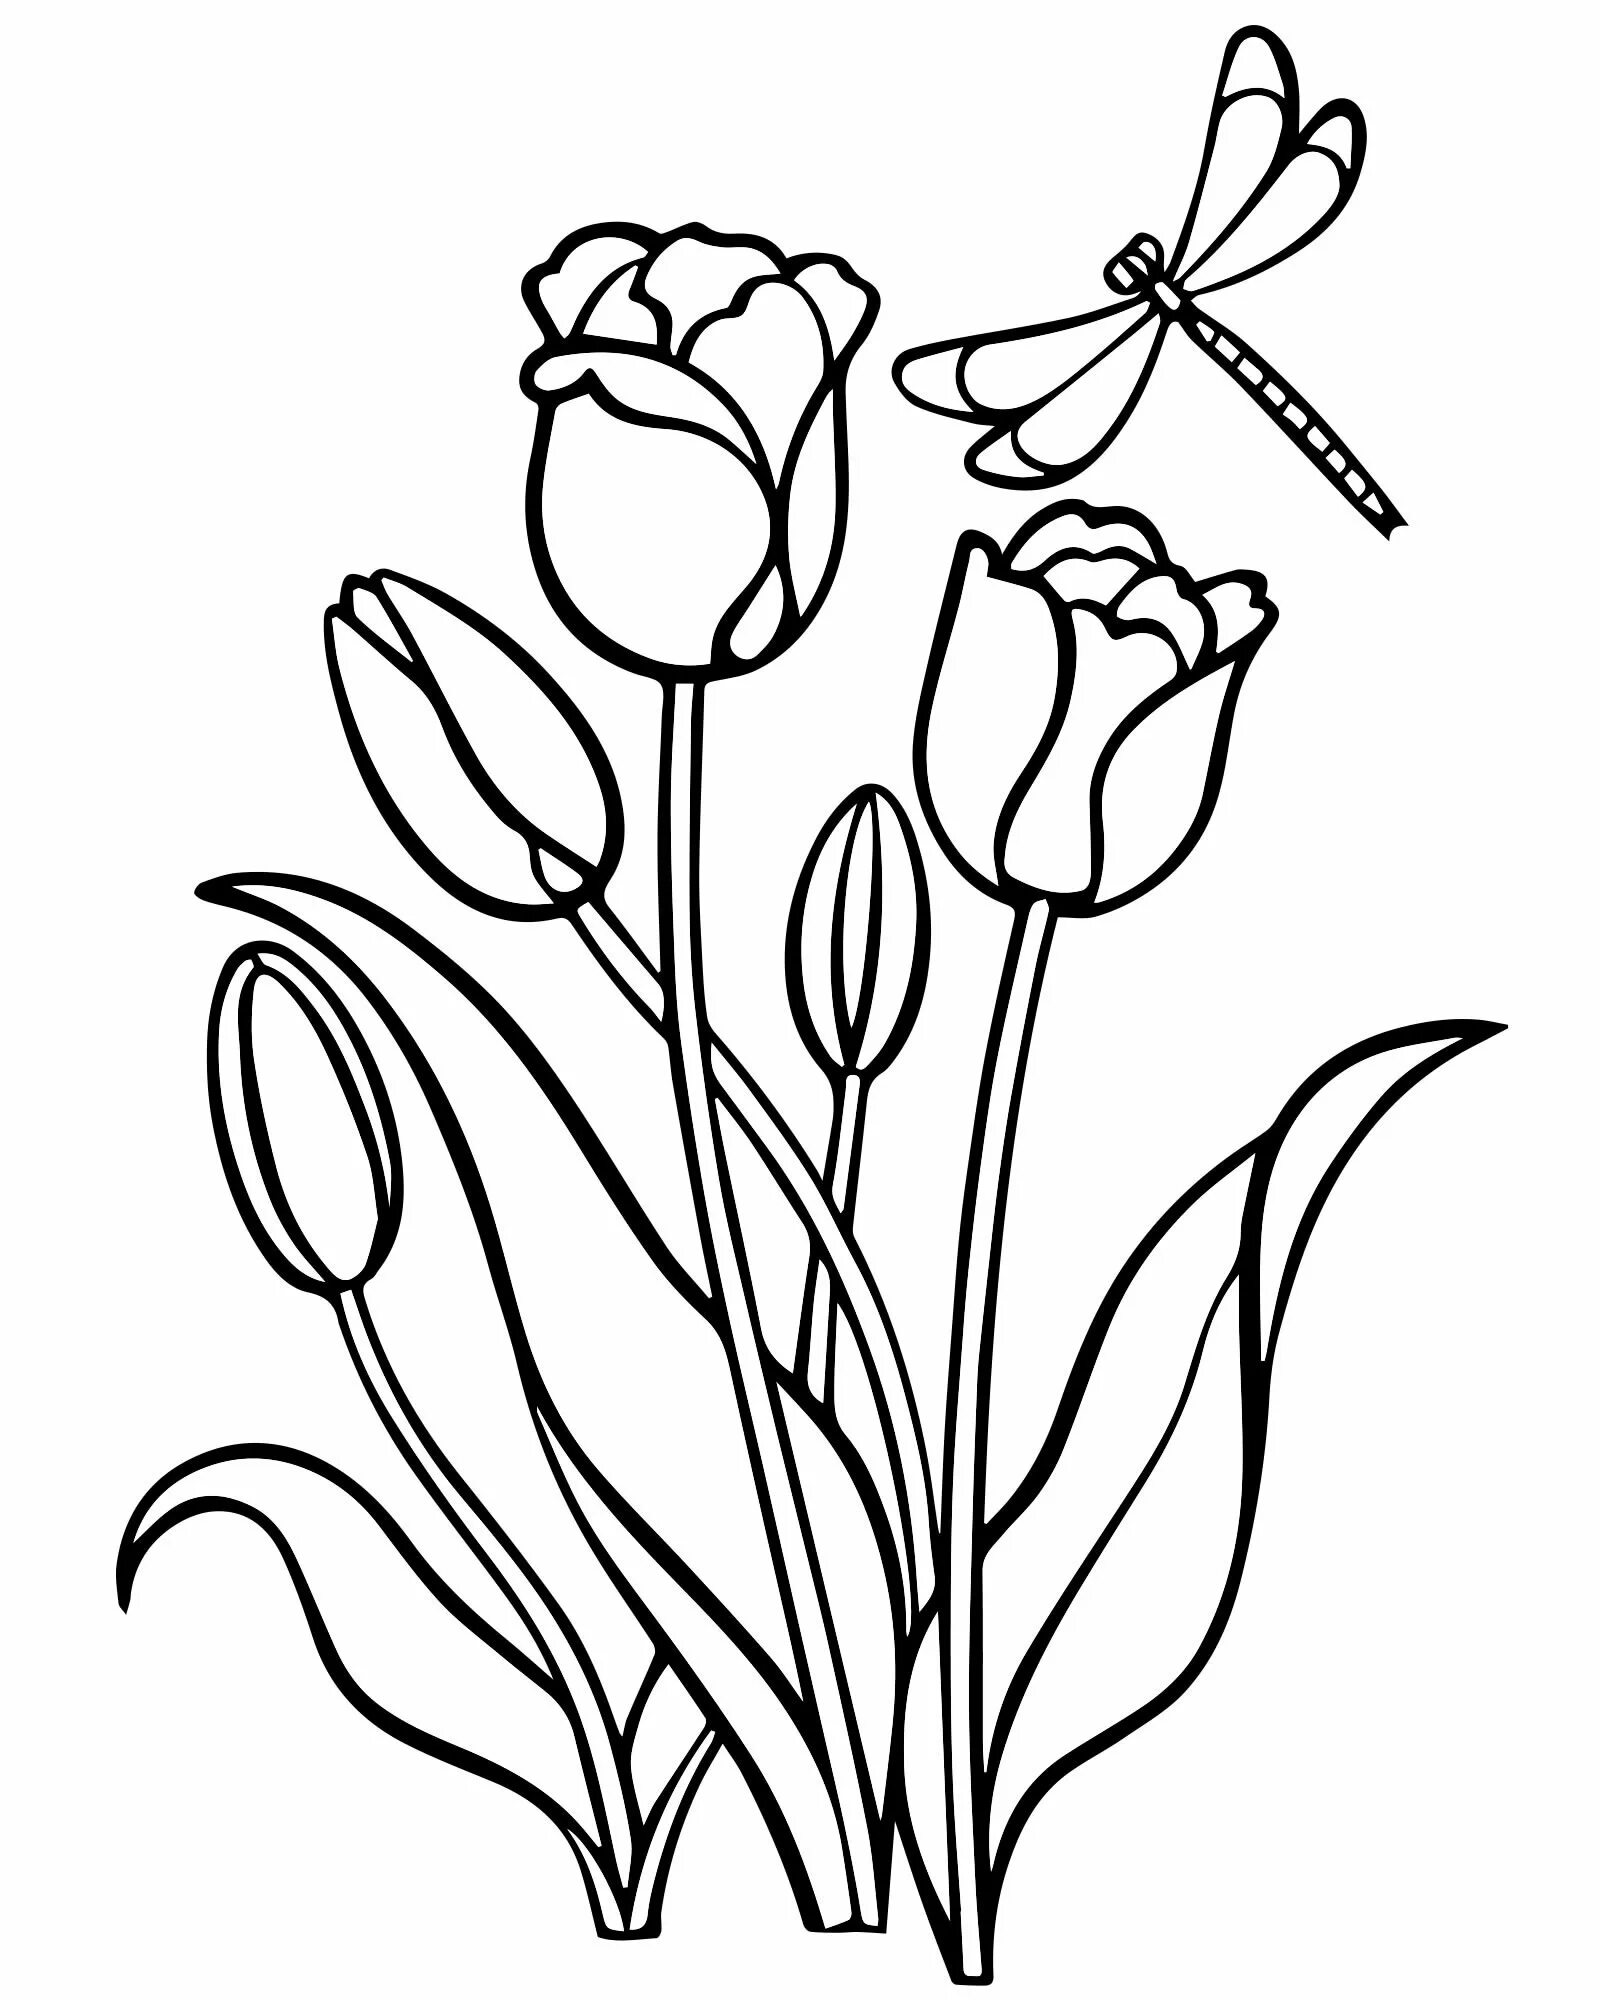 Glittering tulips coloring book for children 5-6 years old